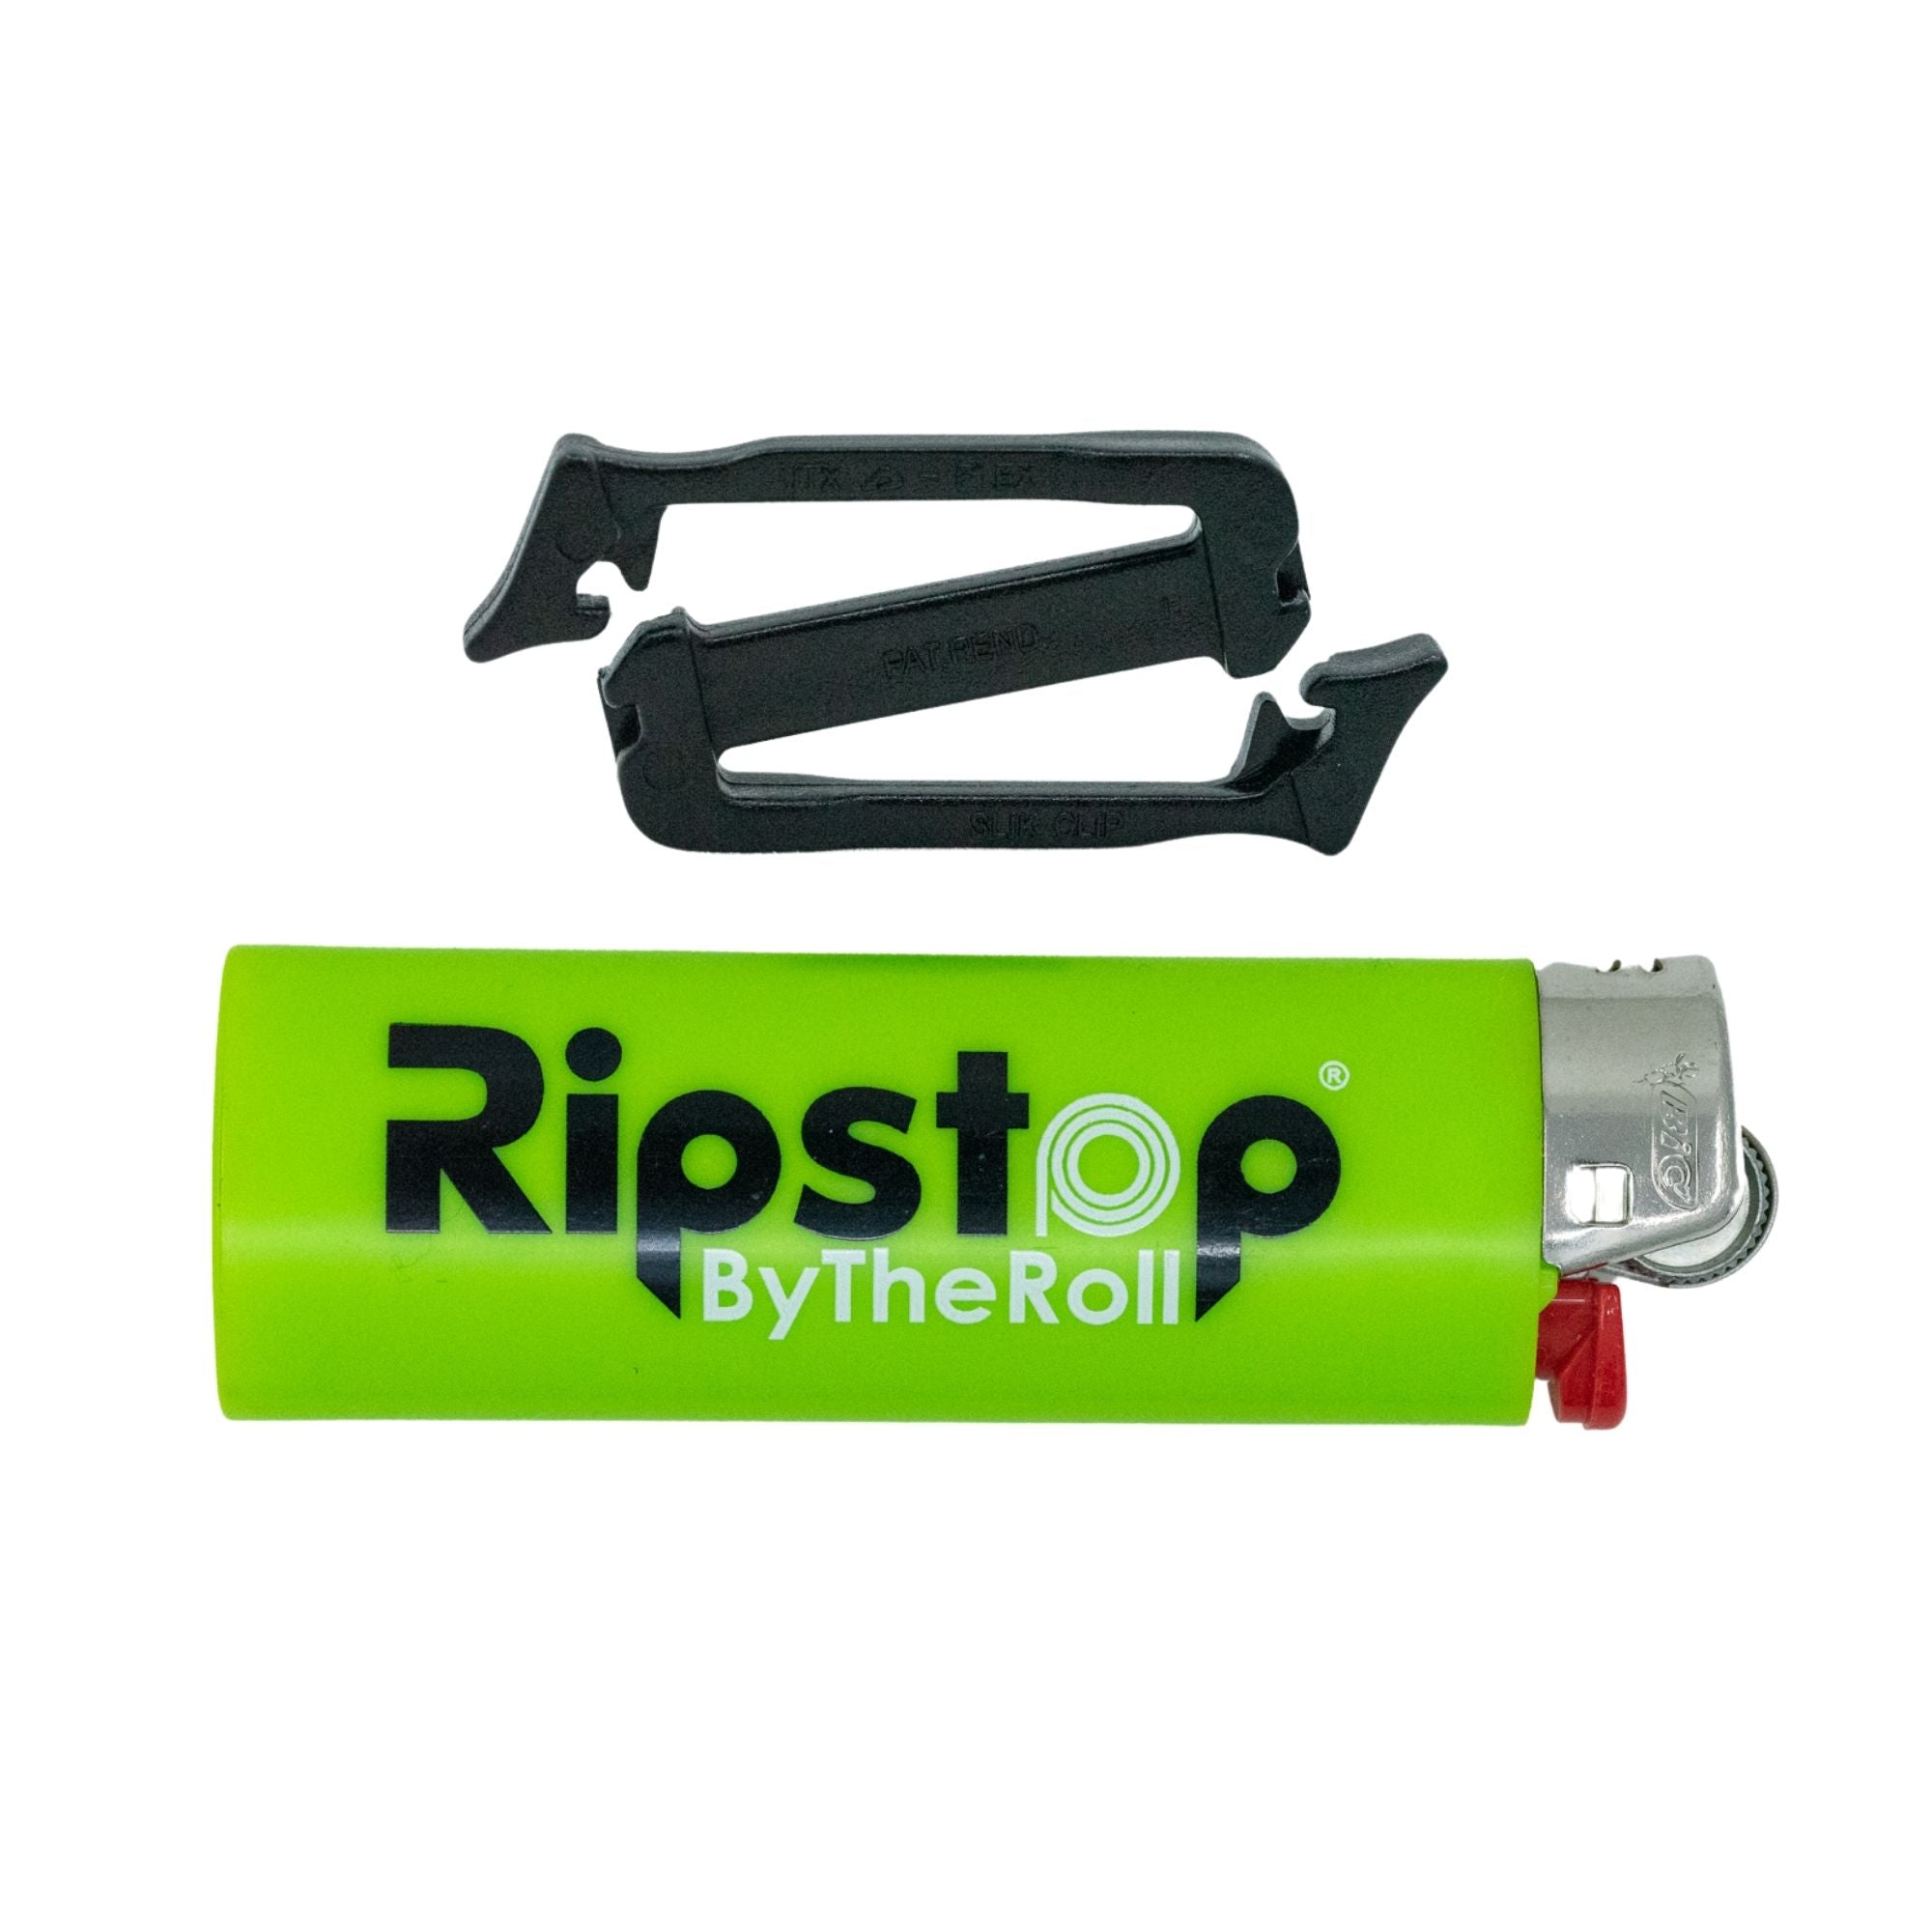 Siamese Slik Clip - Ripstop by the Roll